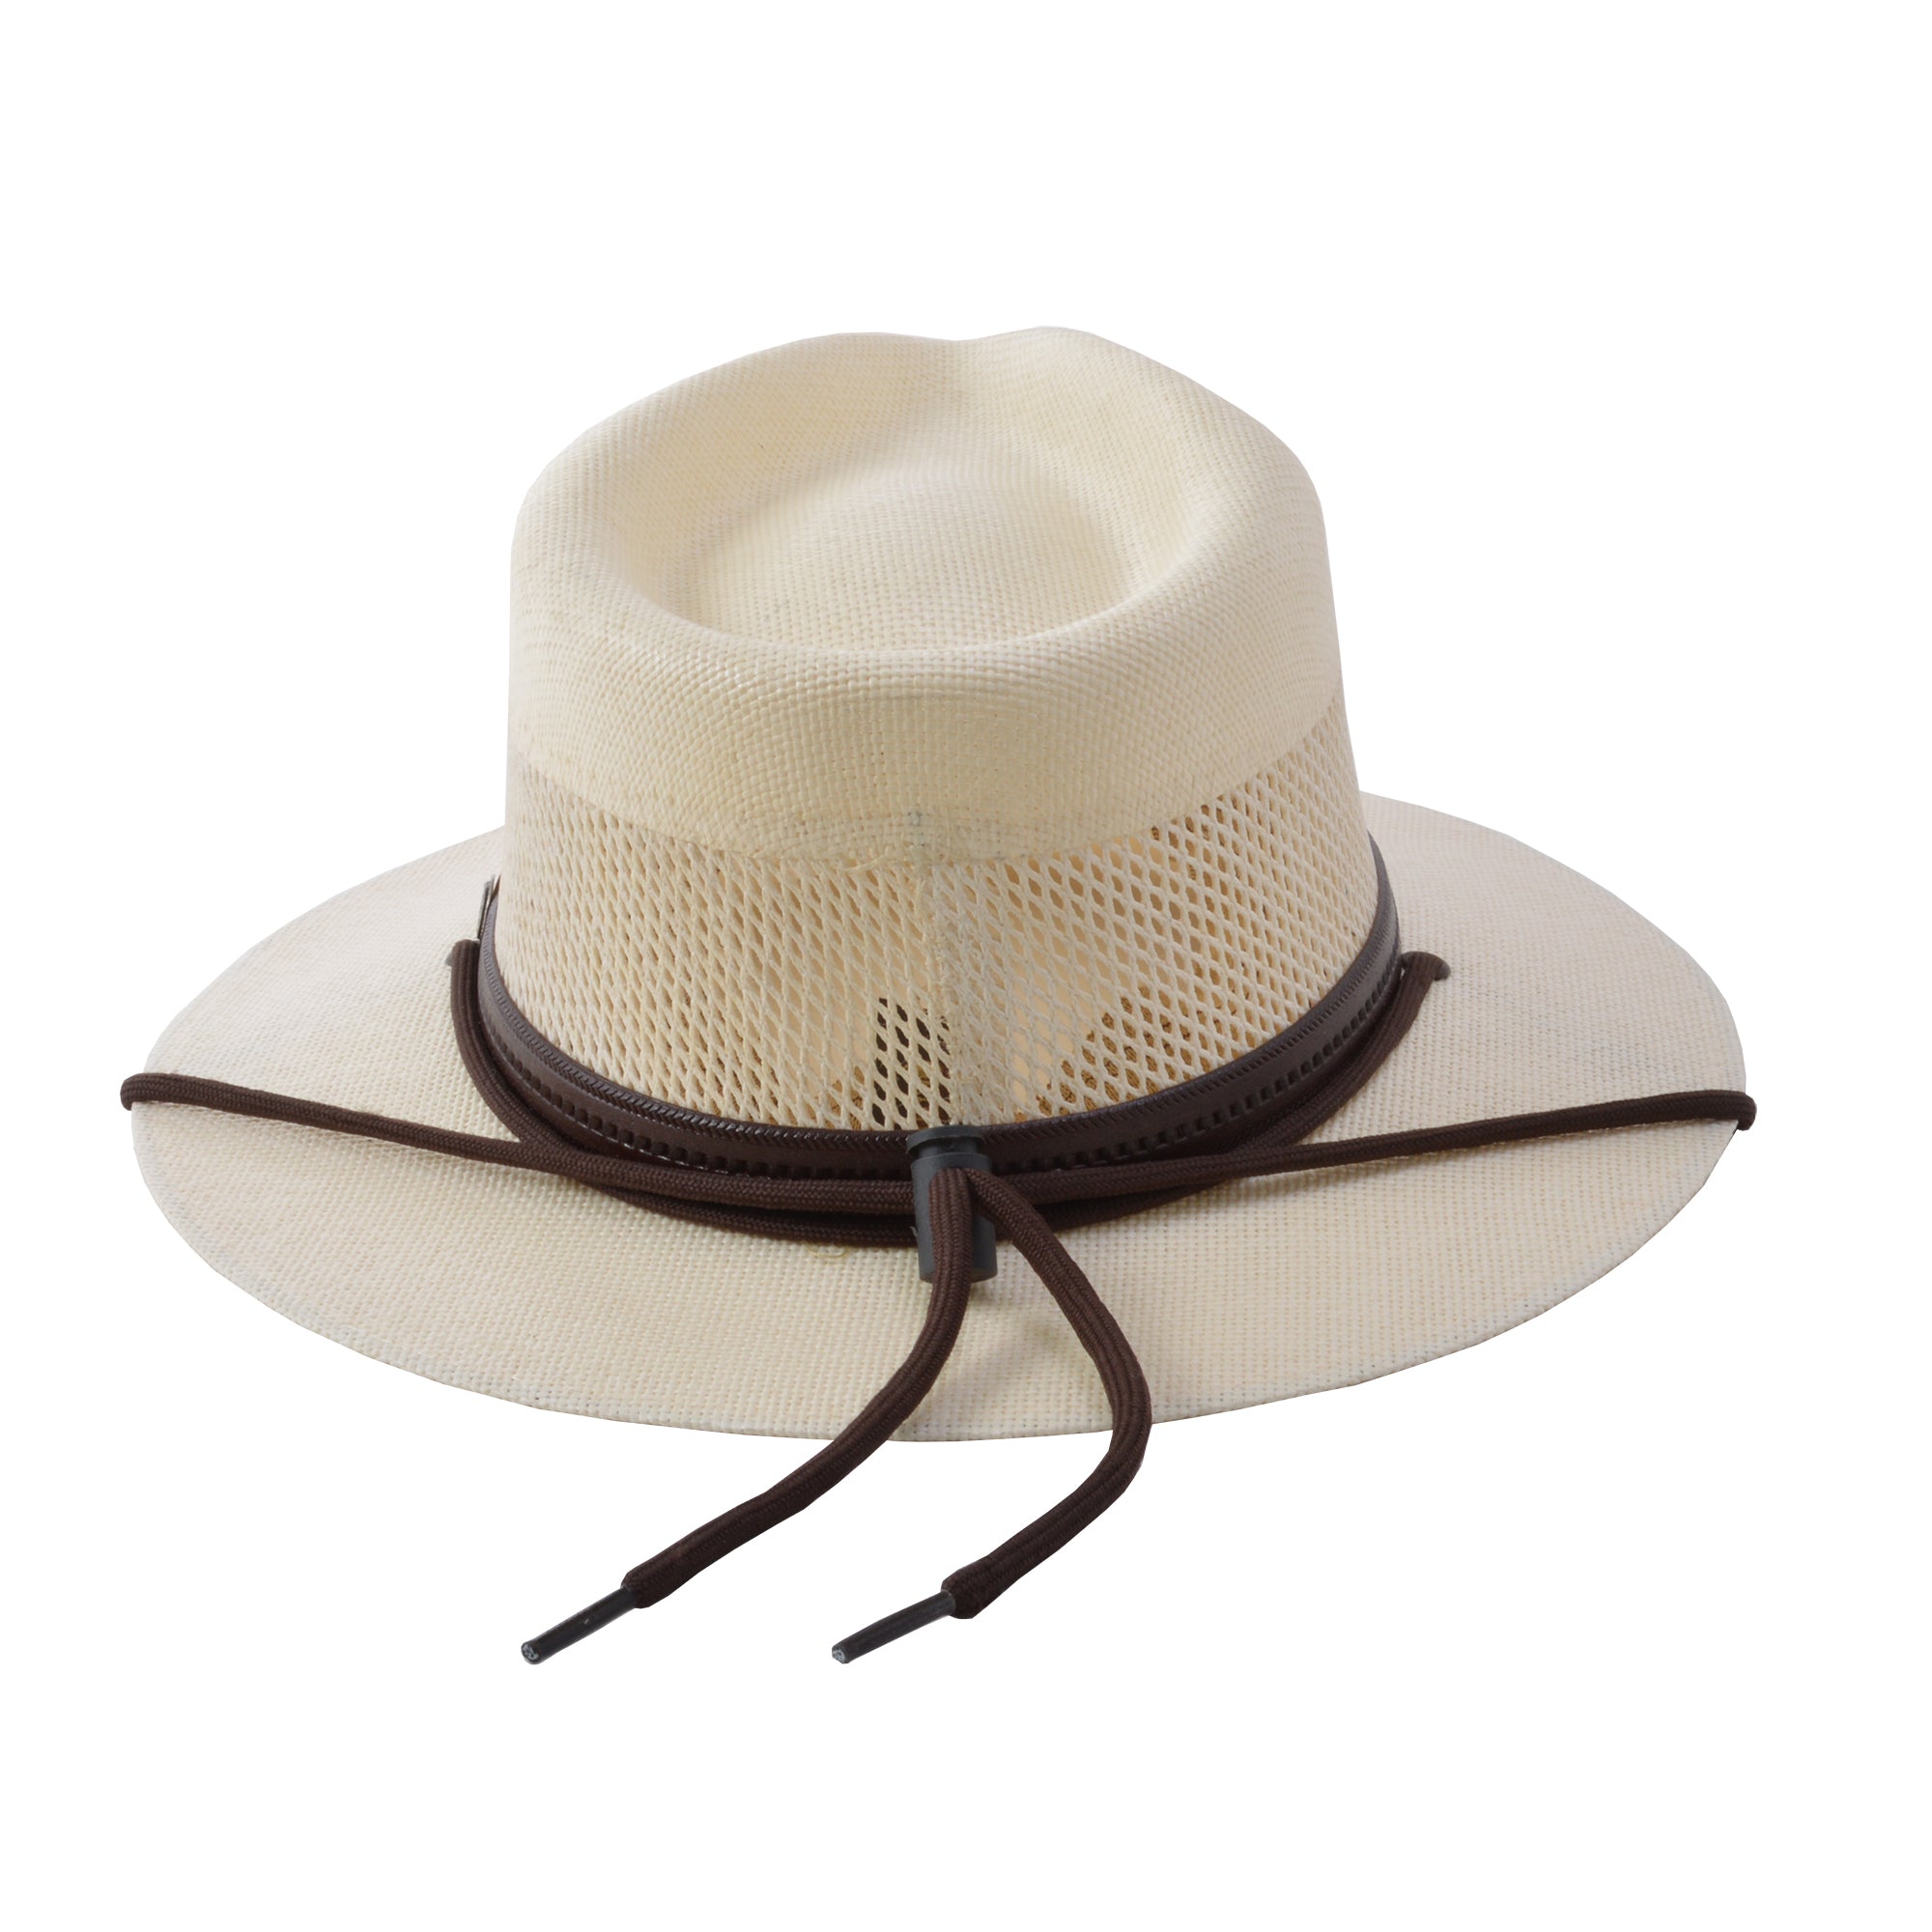 Stetson Afton Vented Canvas Straw Hat in Natural